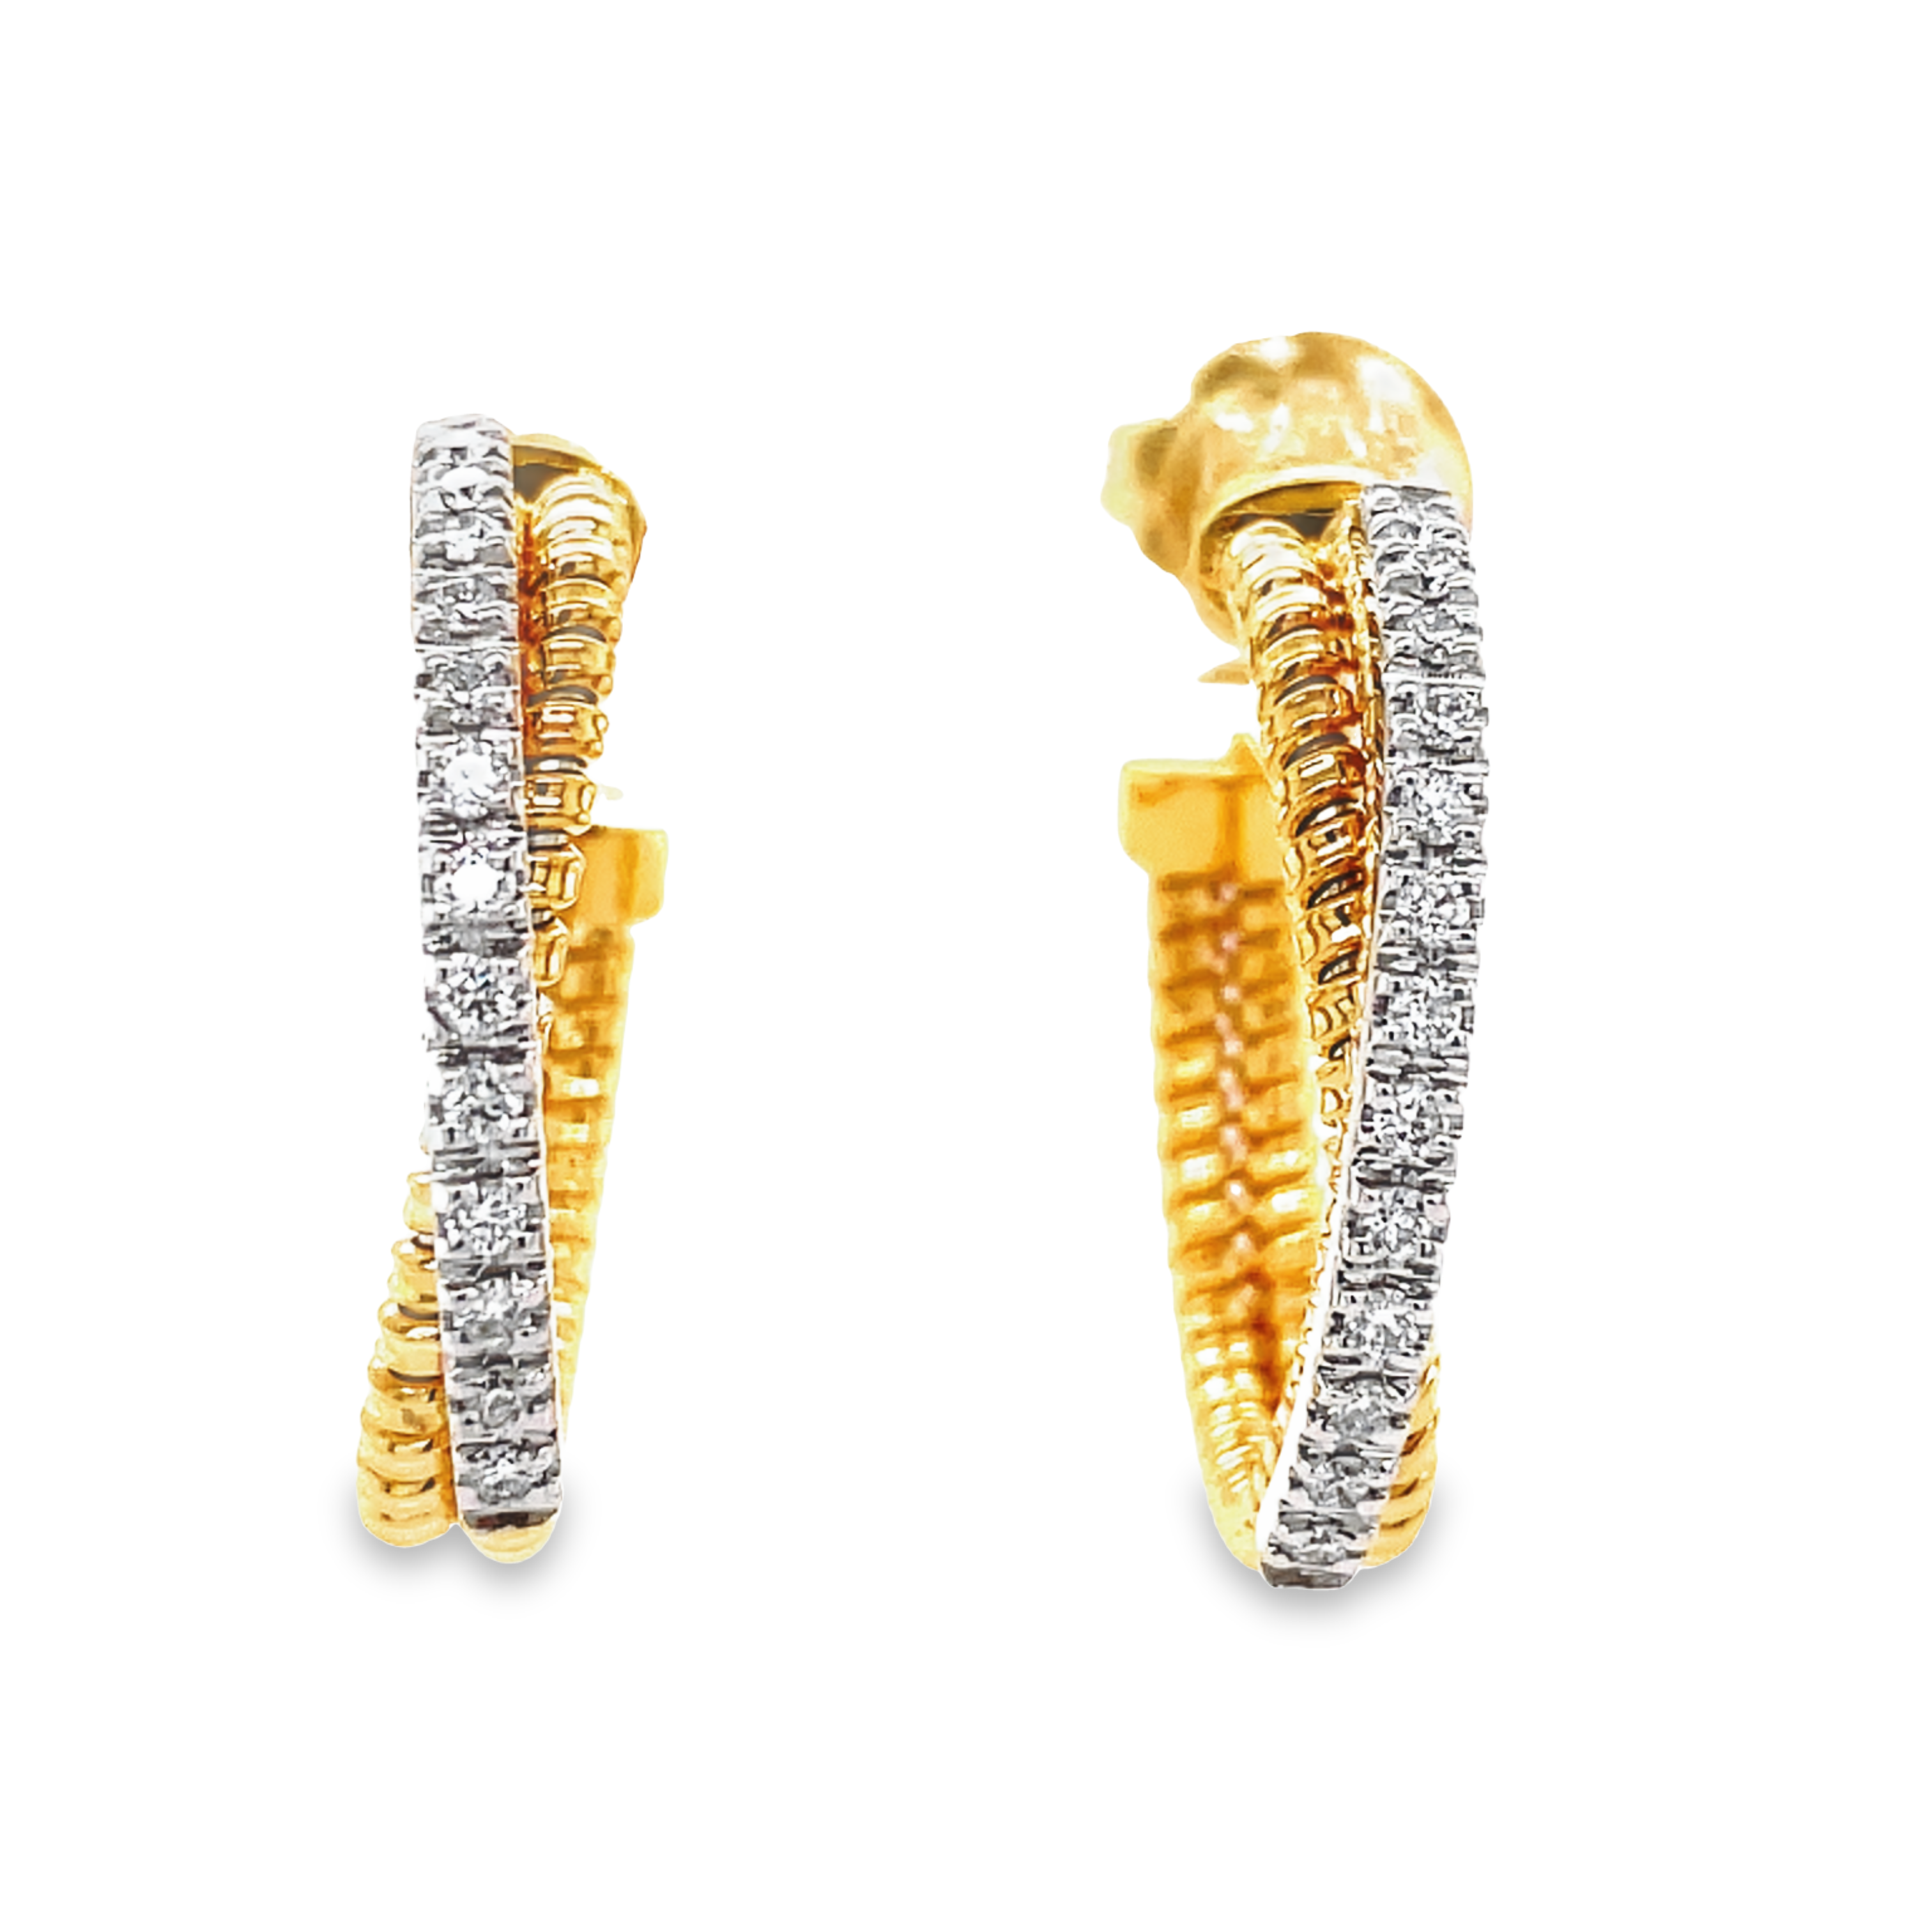 Italian craftsmanship, featuring Tubo gas technique, yields an adjustable design for the stunning hoop earrings. These 18K yellow gold semi-diamond hoops offer a combination of classic and contemporary styling with 0.33 carats of round diamonds at 3.10 mm width. They measure 1” in diameter.